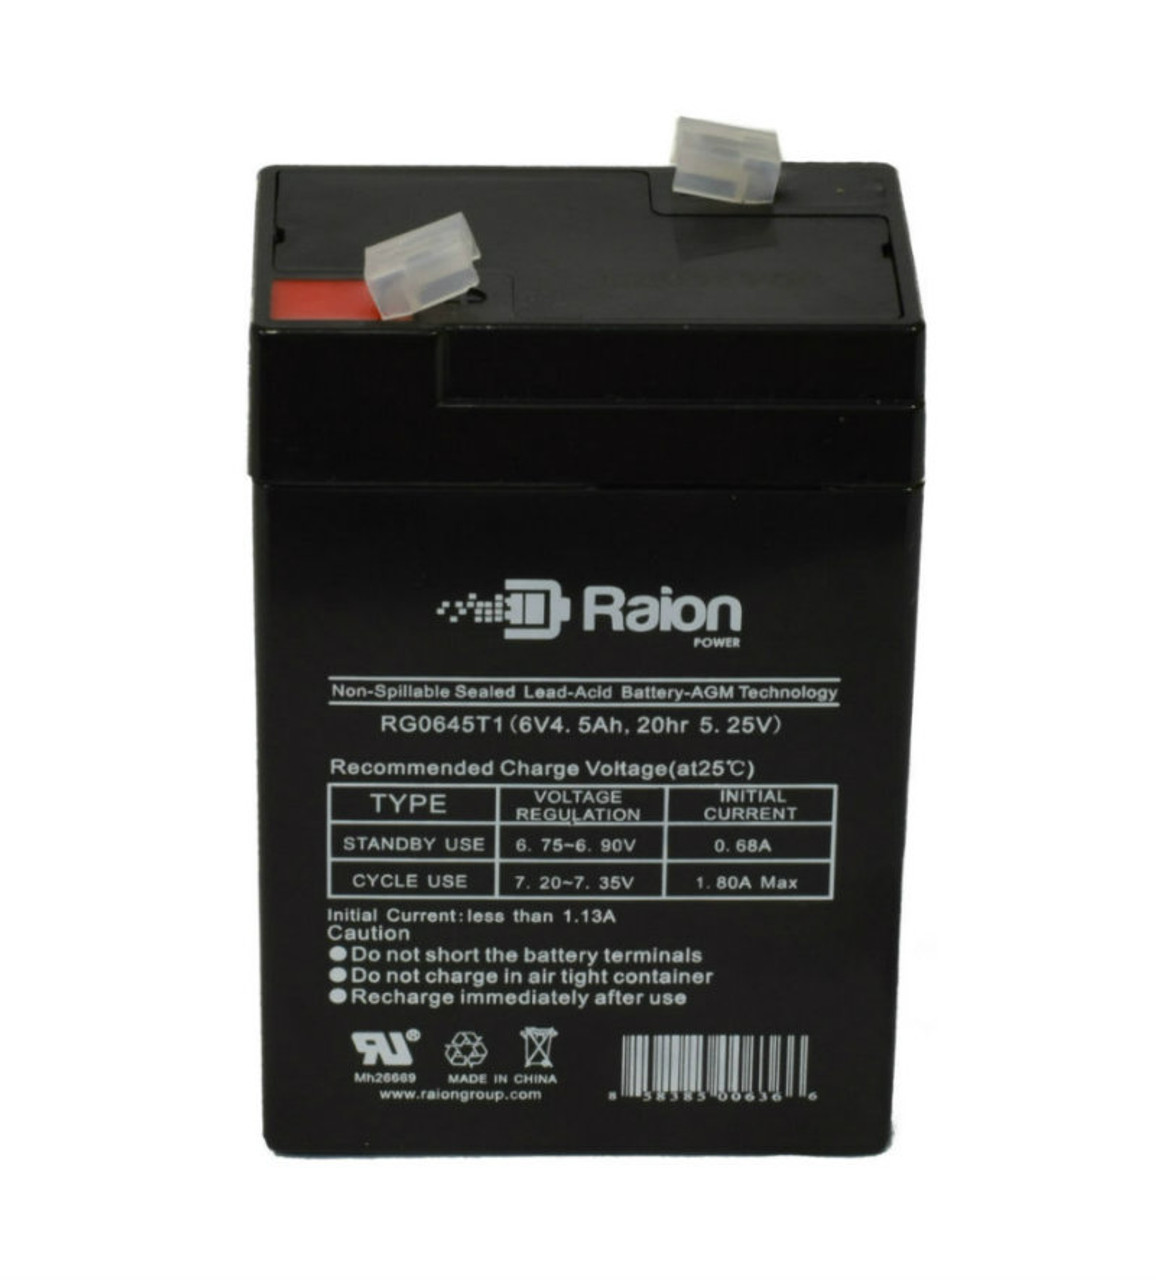 Raion Power RG0645T1 Replacement Battery Cartridge for Edwards 1624